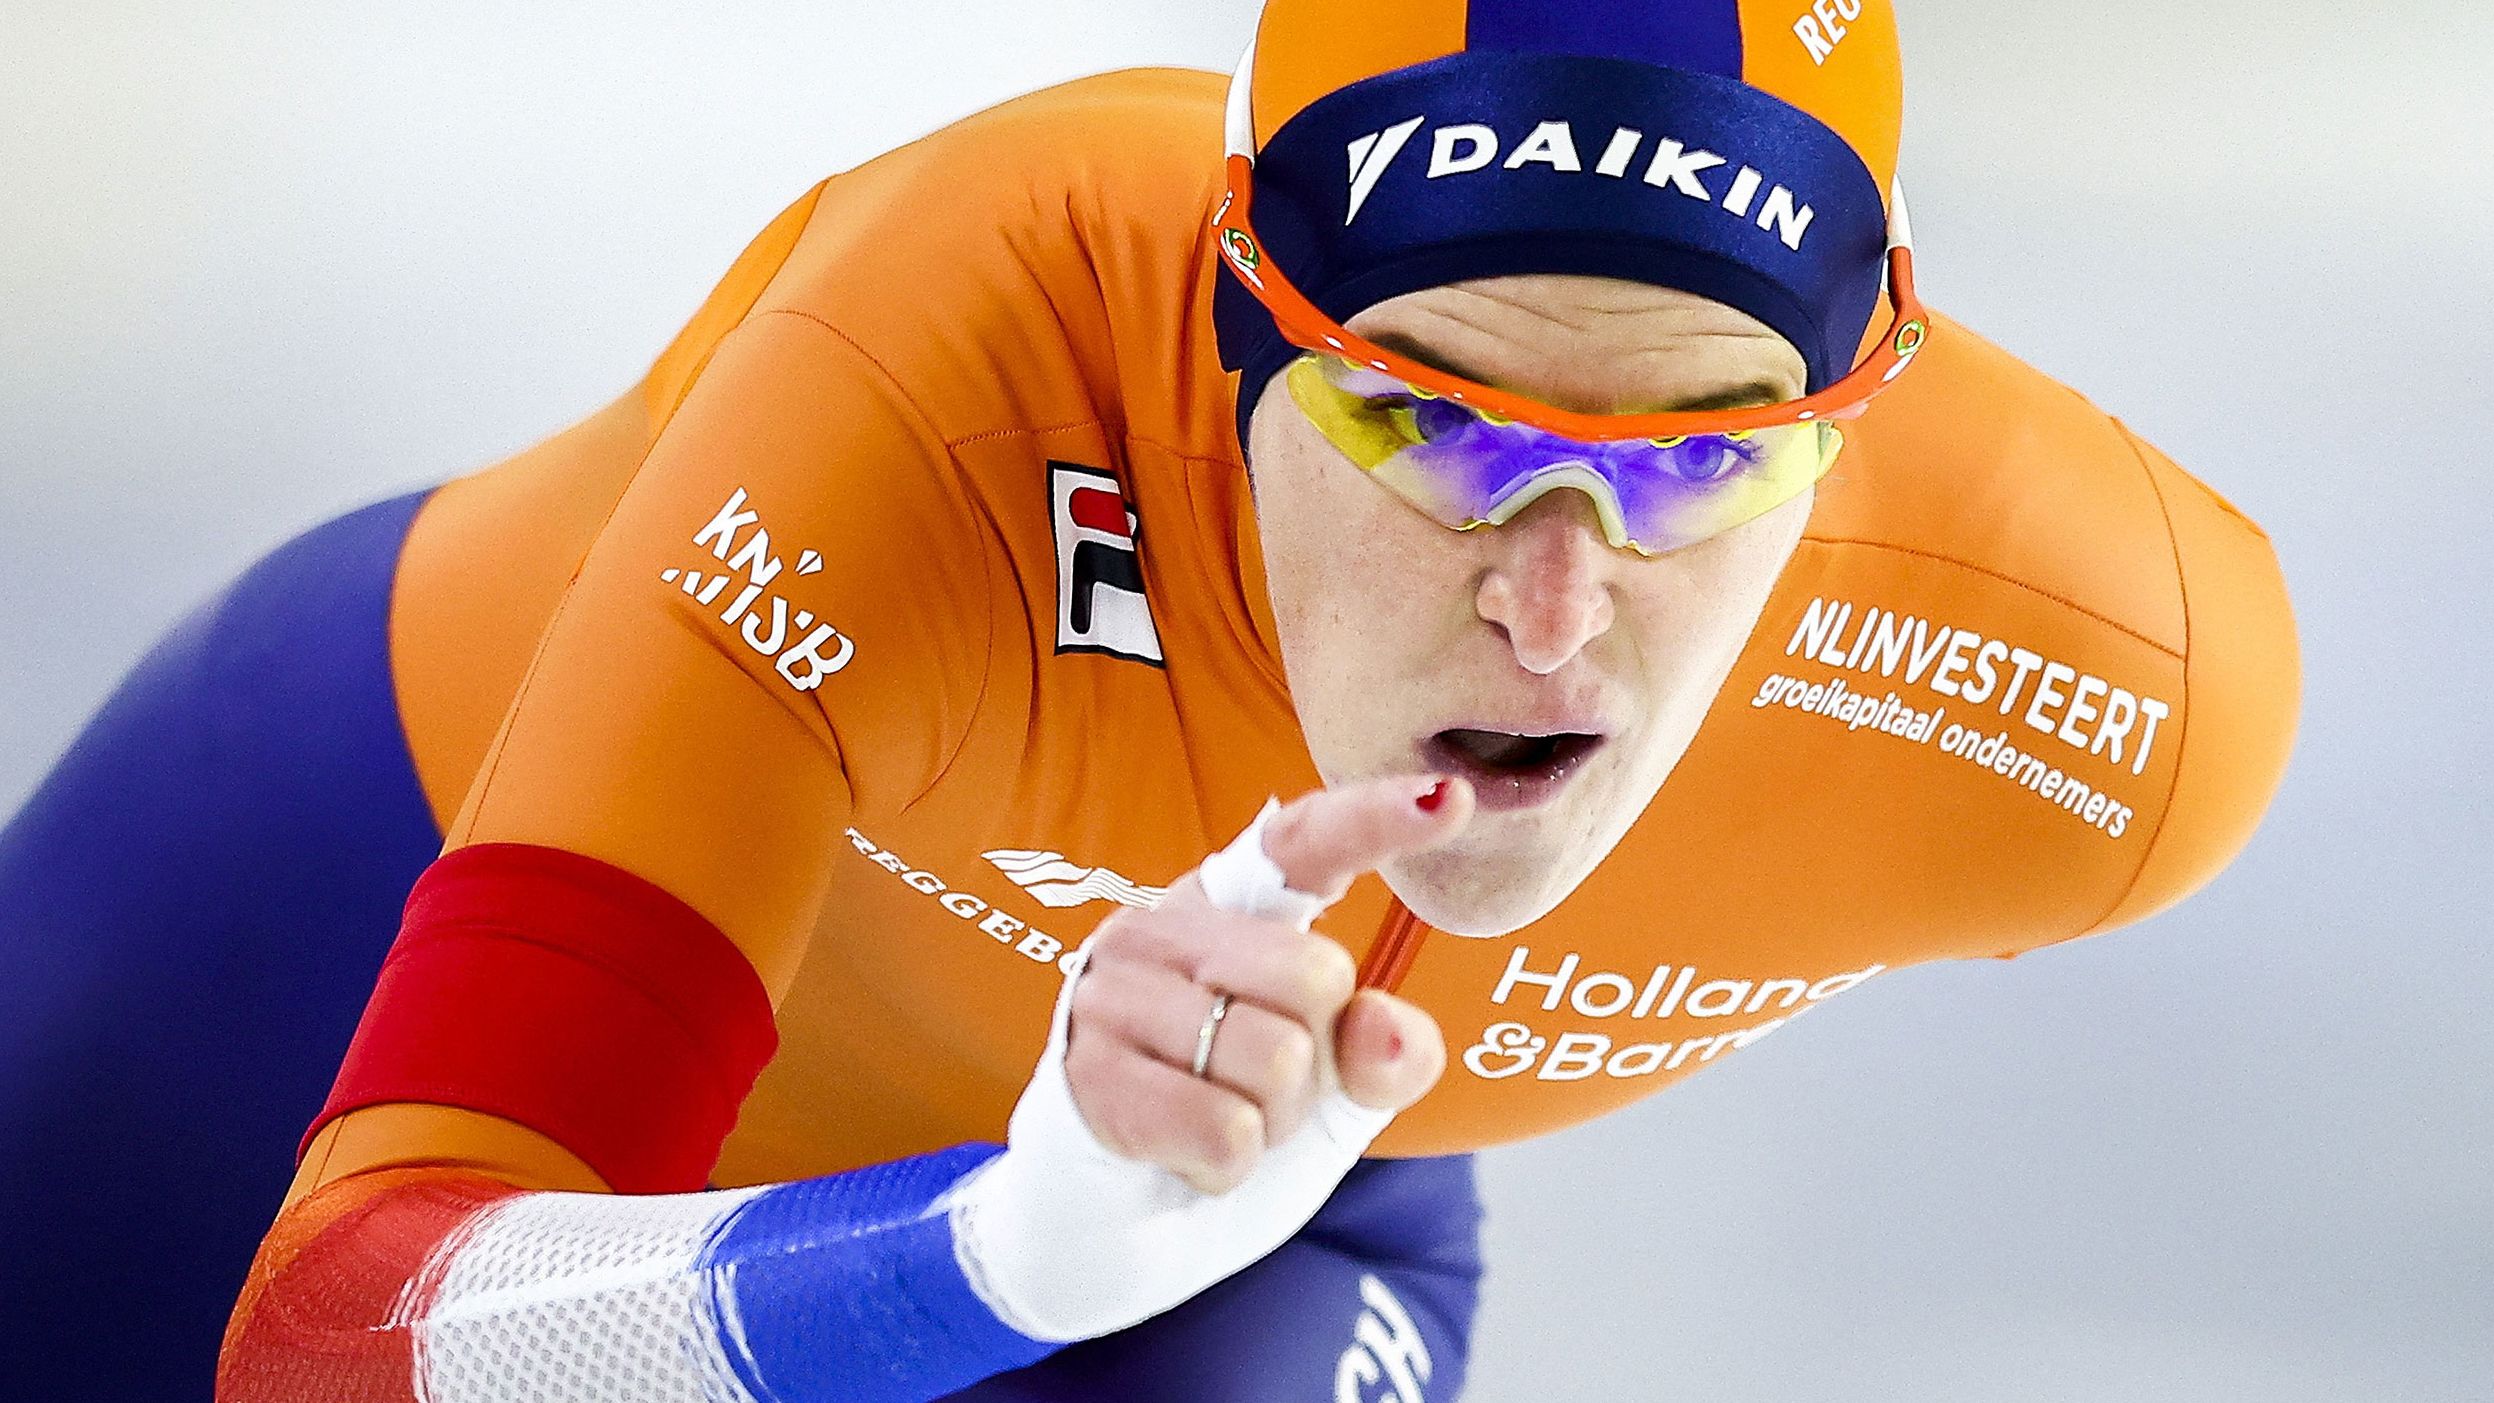 <strong>Ireen Wüst (Netherlands):</strong> The Dutch are renowned for their speedskating program, and Wüst is the greatest of them all. No long-track speedskater has won more Olympic medals than she has (11). Five of those medals are gold, including one from 2018 in the 1,500 meters. She's won a gold medal at every Winter Olympics since 2006. 